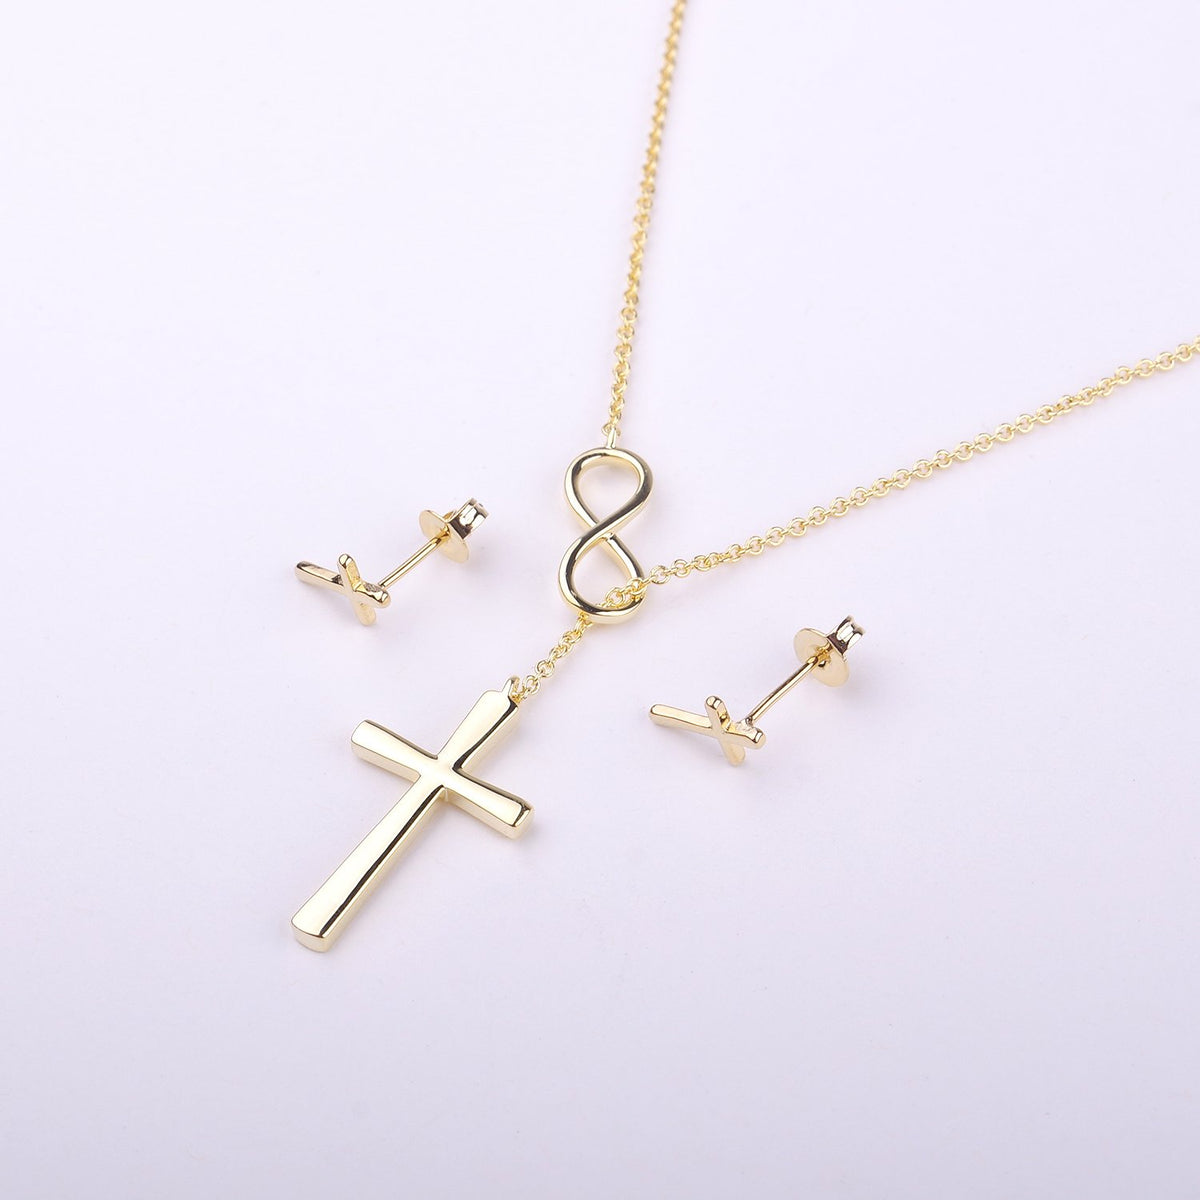 Christmas Gift Esthetician Cross earring and Necklace Set Jewelry Set